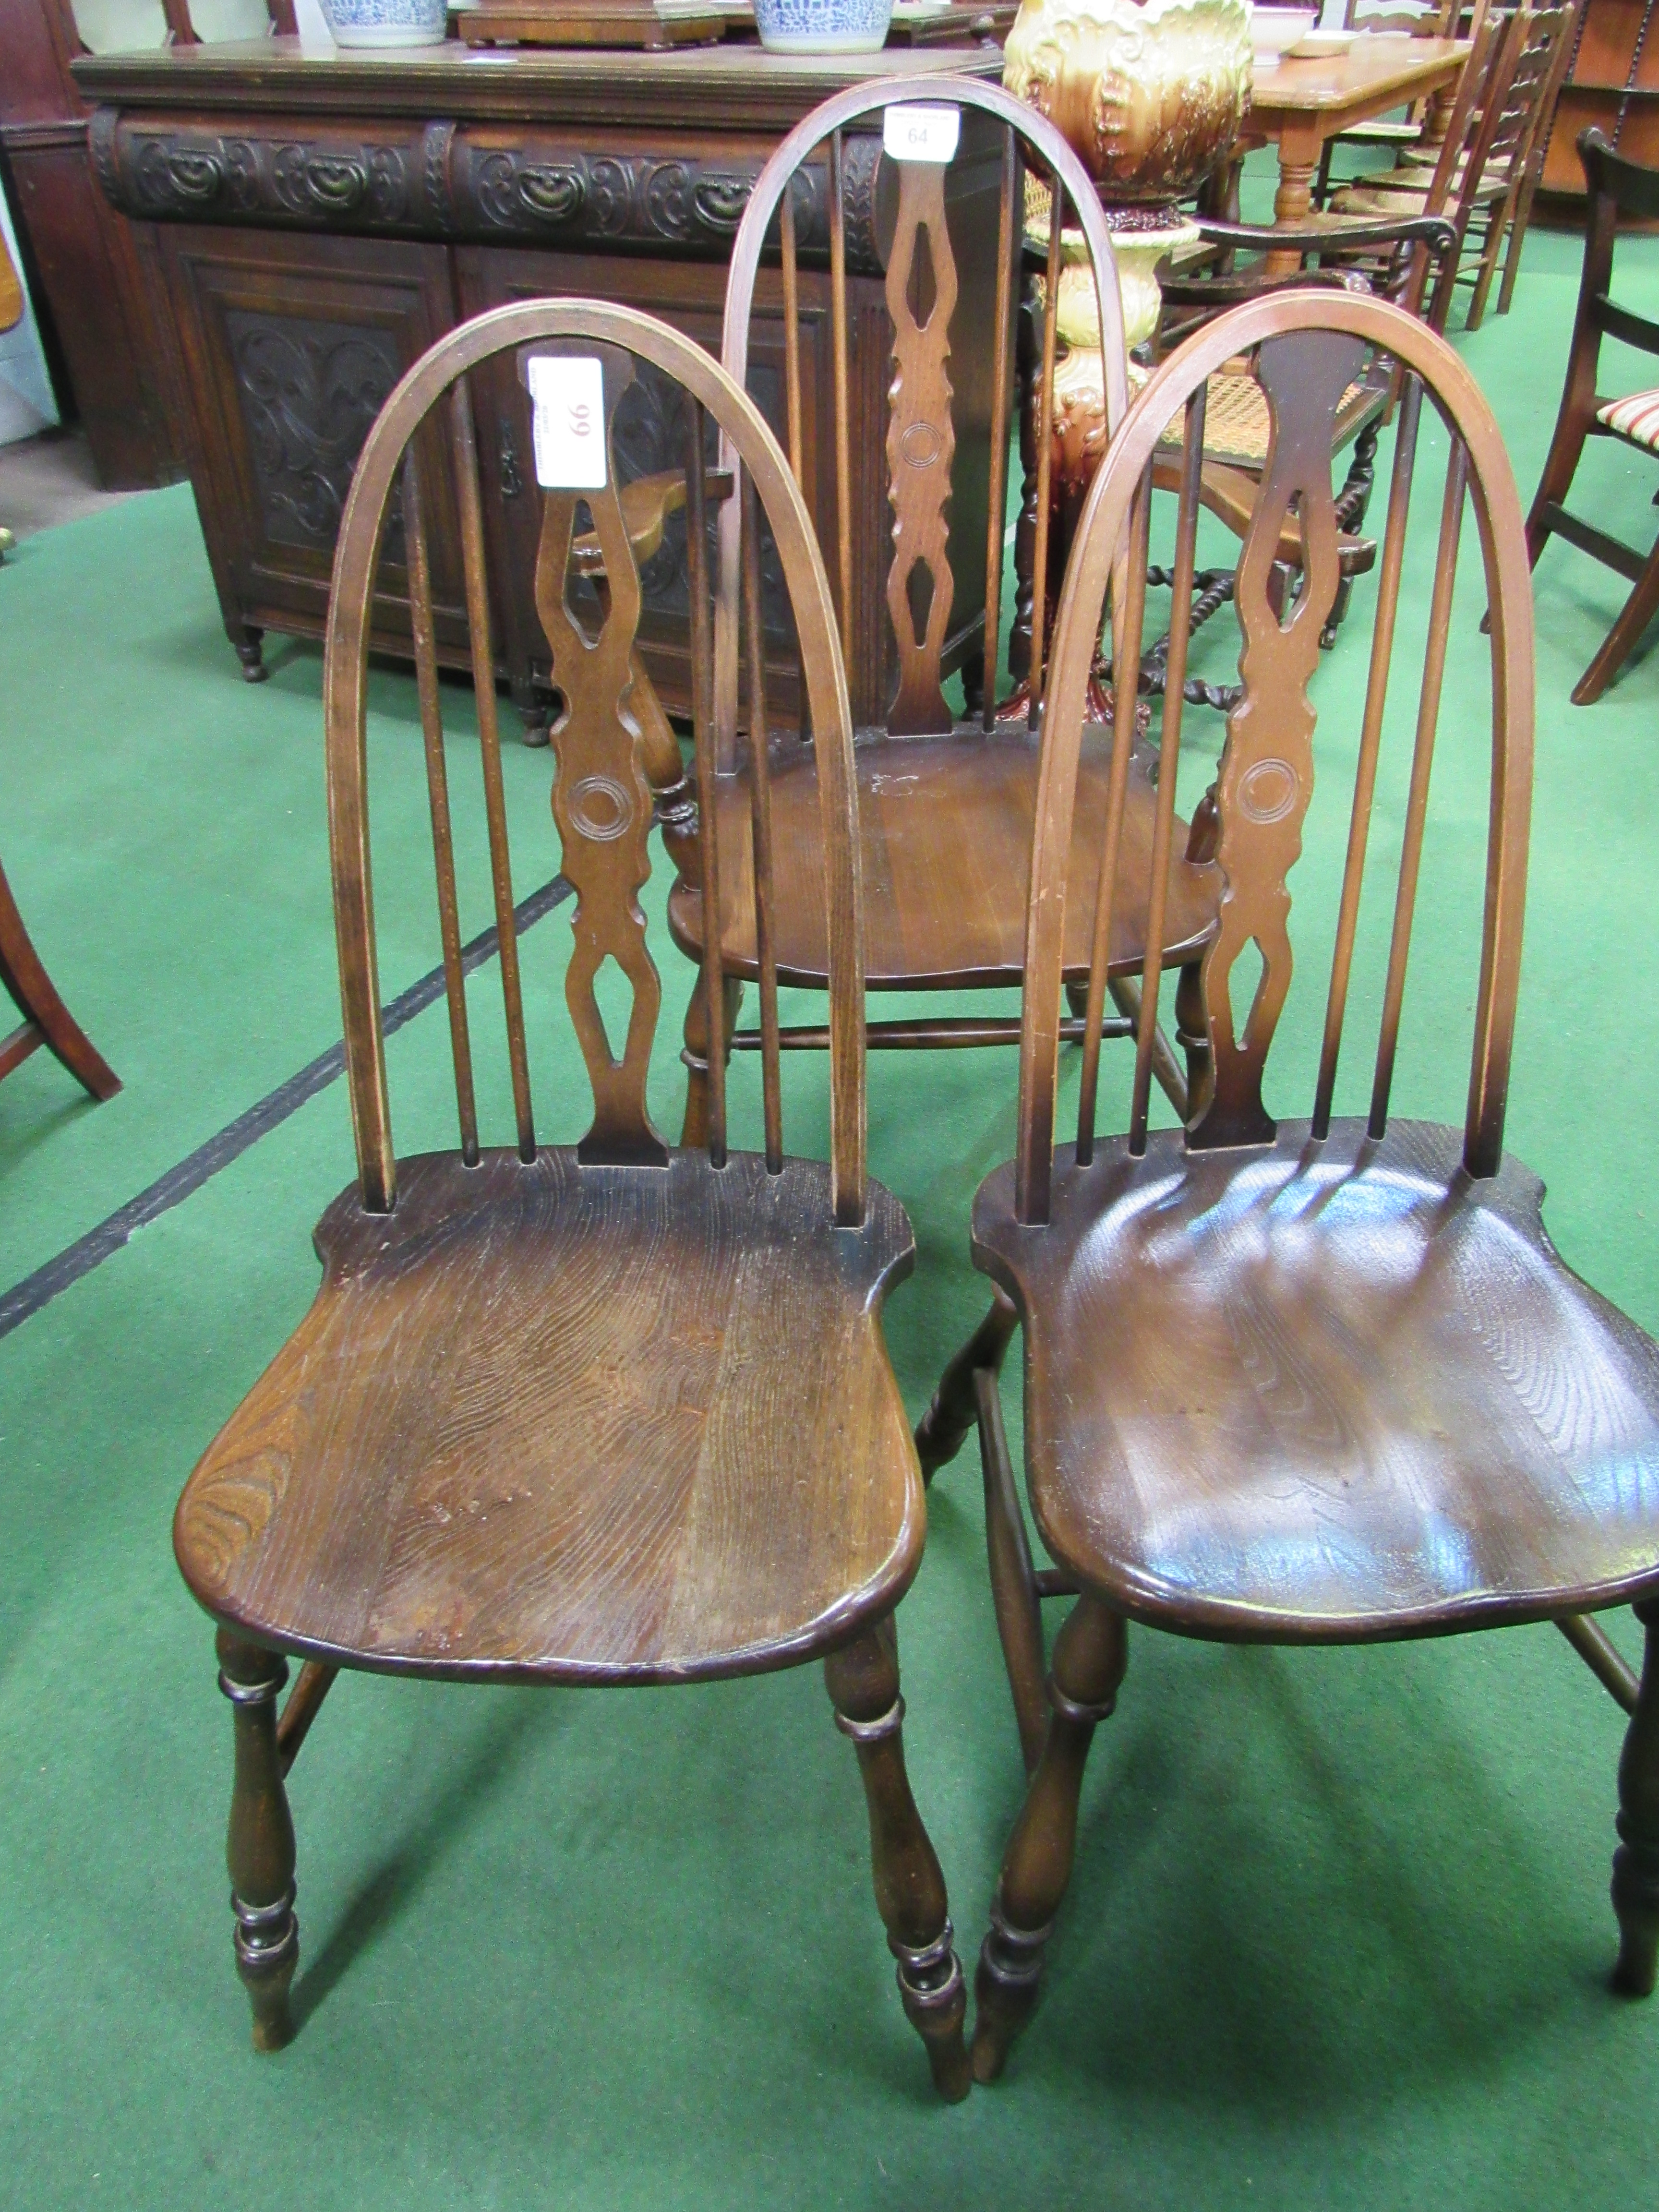 6 rail back shaped seat chairs and 2 matching carvers. Estimate £10-30. - Image 4 of 4